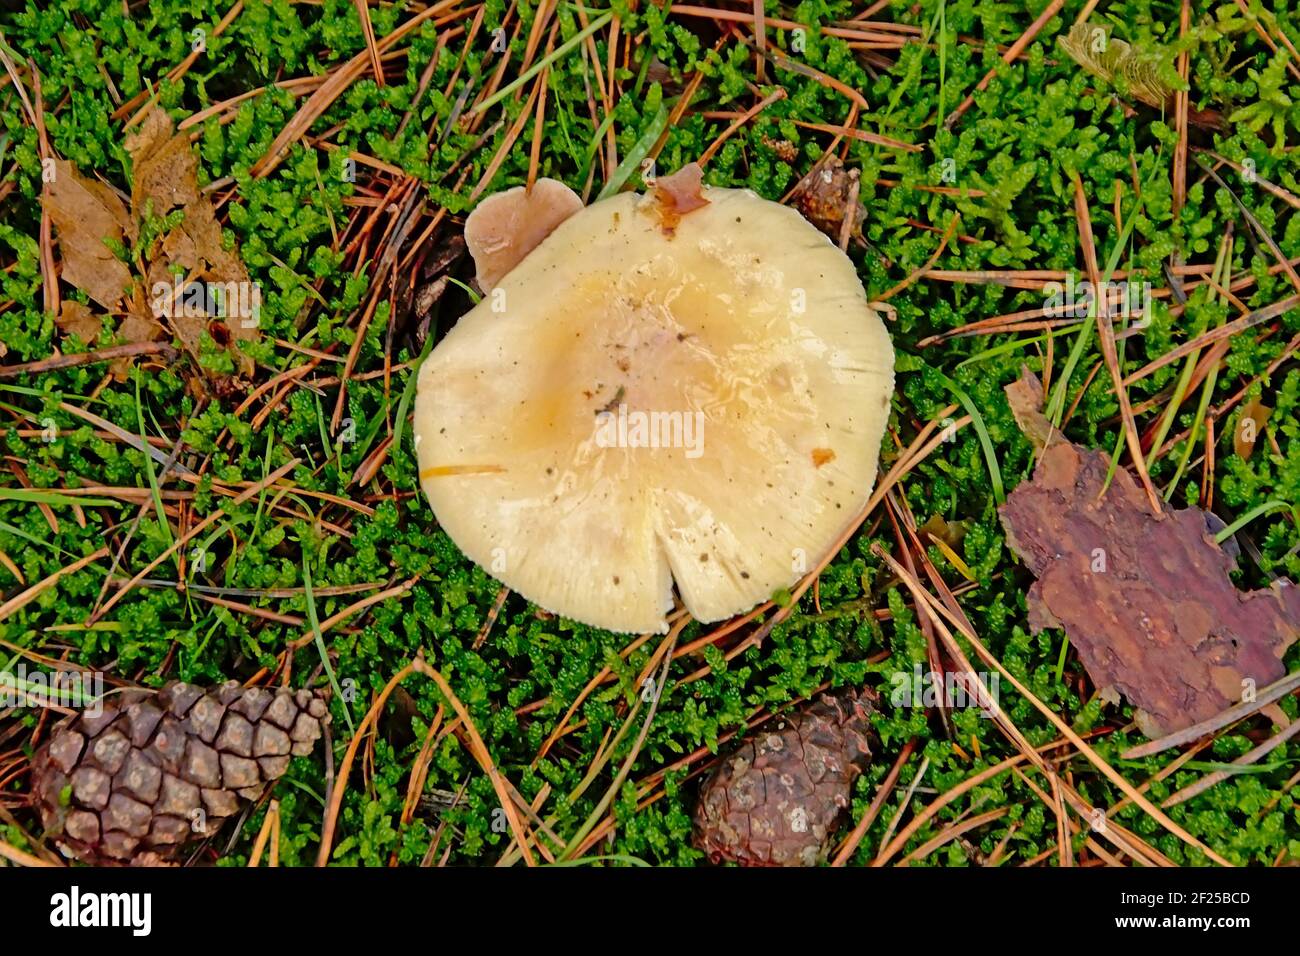 Shiny wet white russula mushroom in between moss on the forest floor, Stock Photo